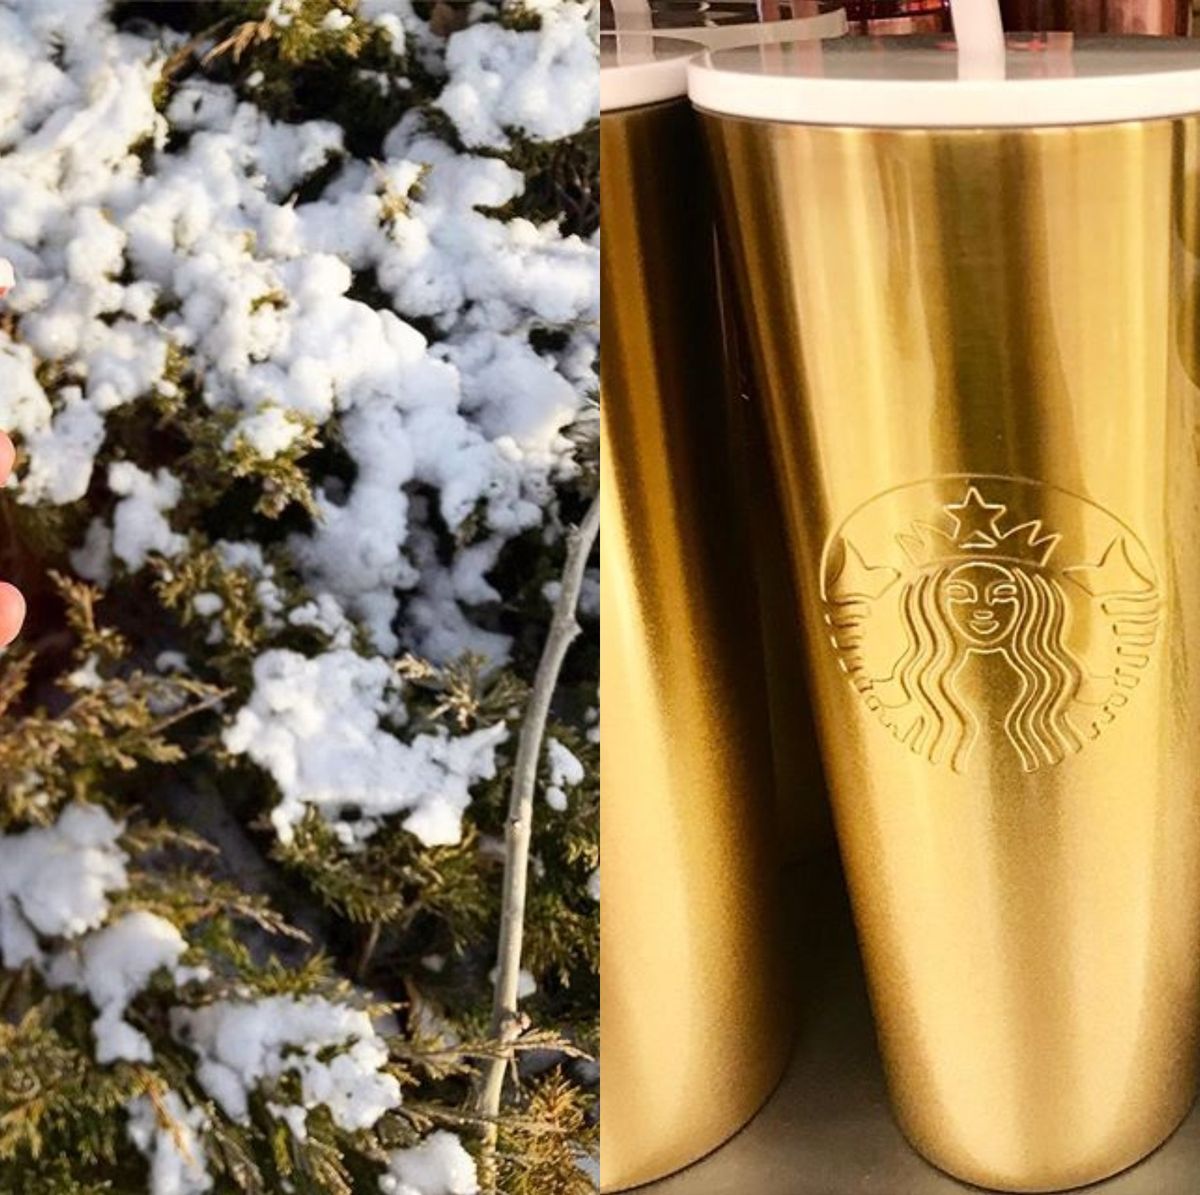 Stanley Just Released a New Holiday Tumbler With a Candy Cane